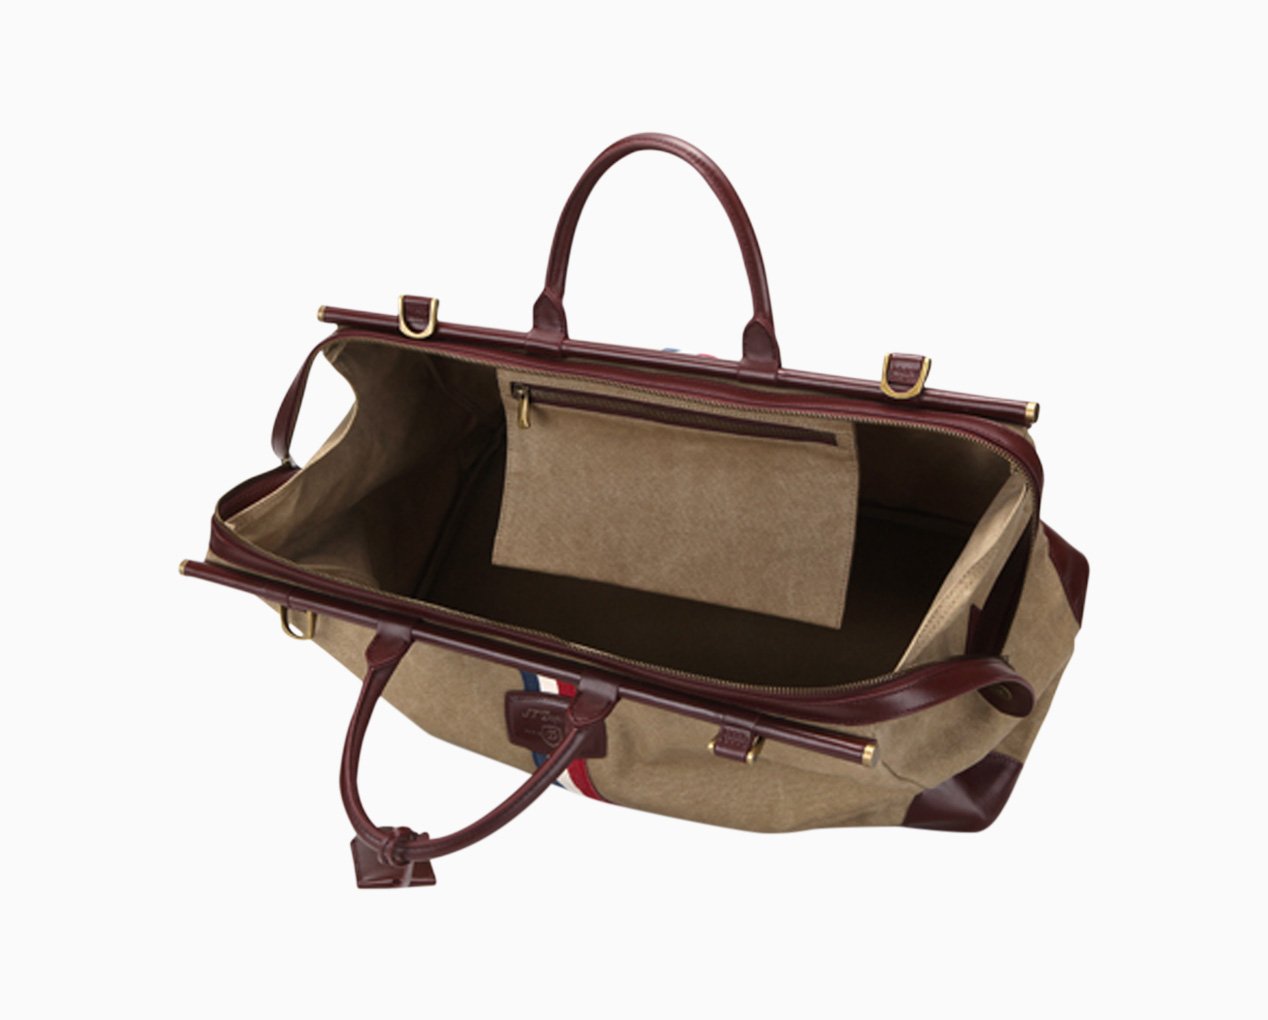 S.T. Dupont Travel bag collection